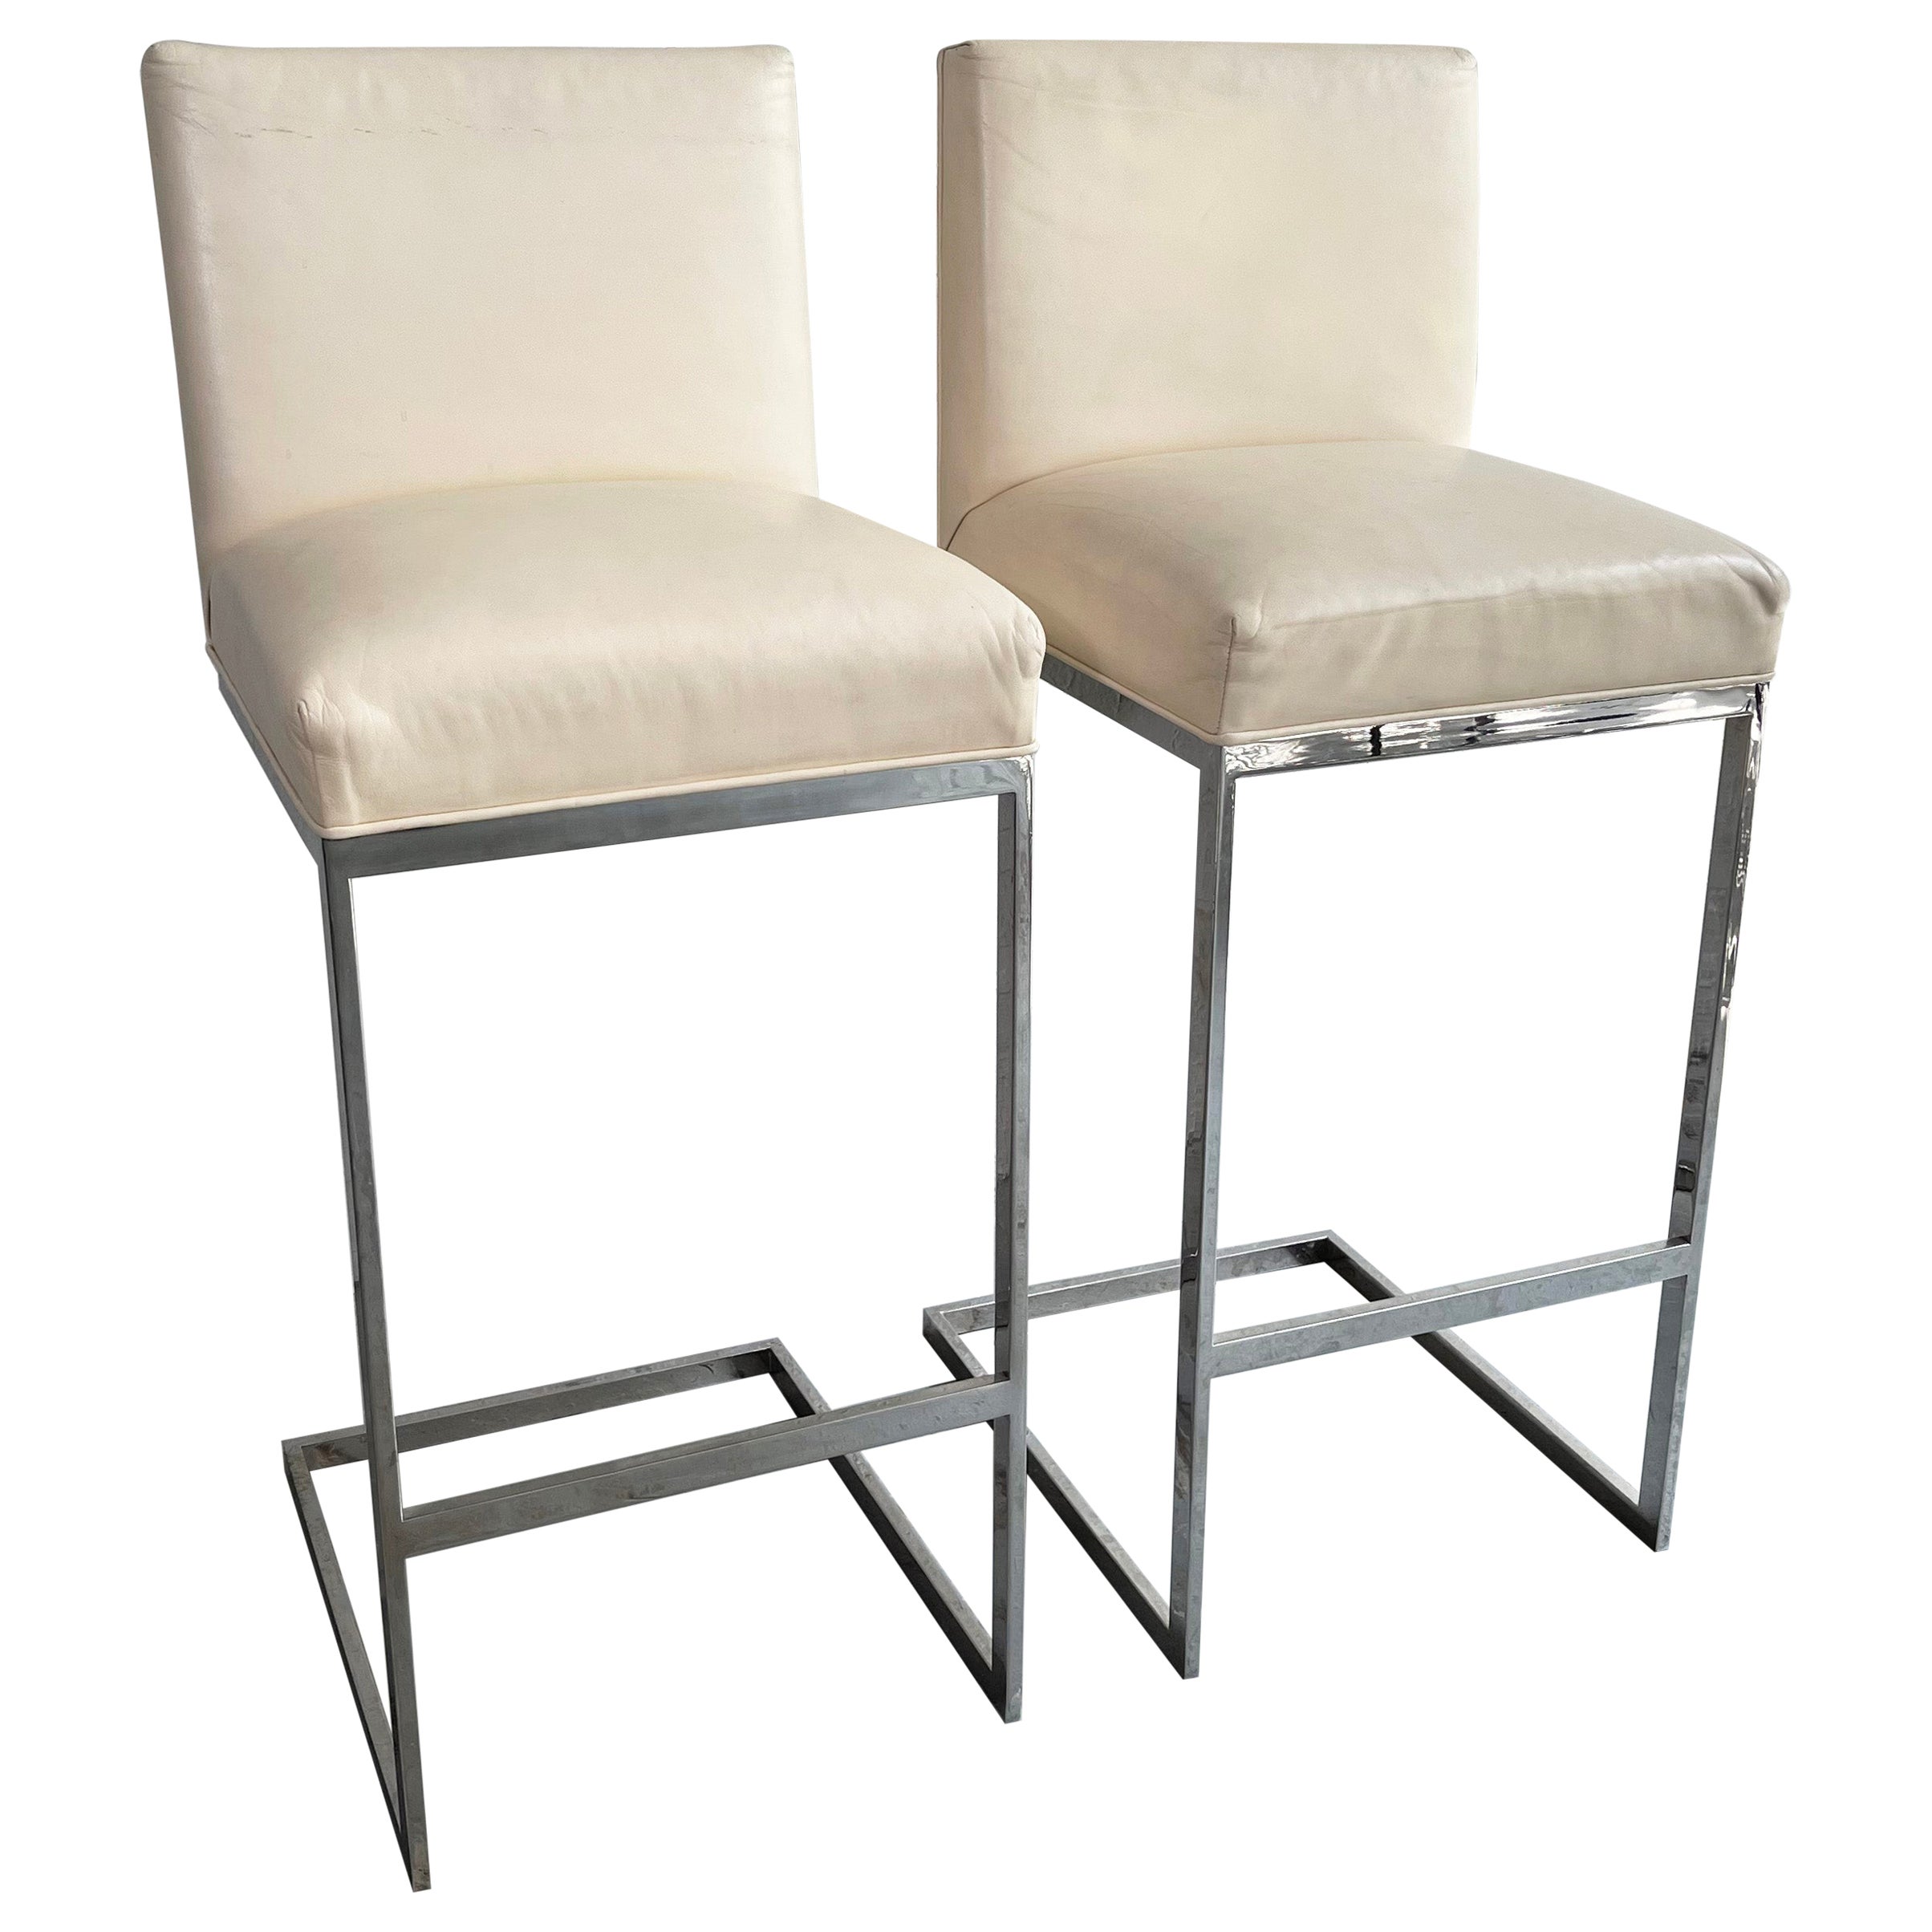 Minimal Leather Chrome Cantilever Bar Stools For Sale